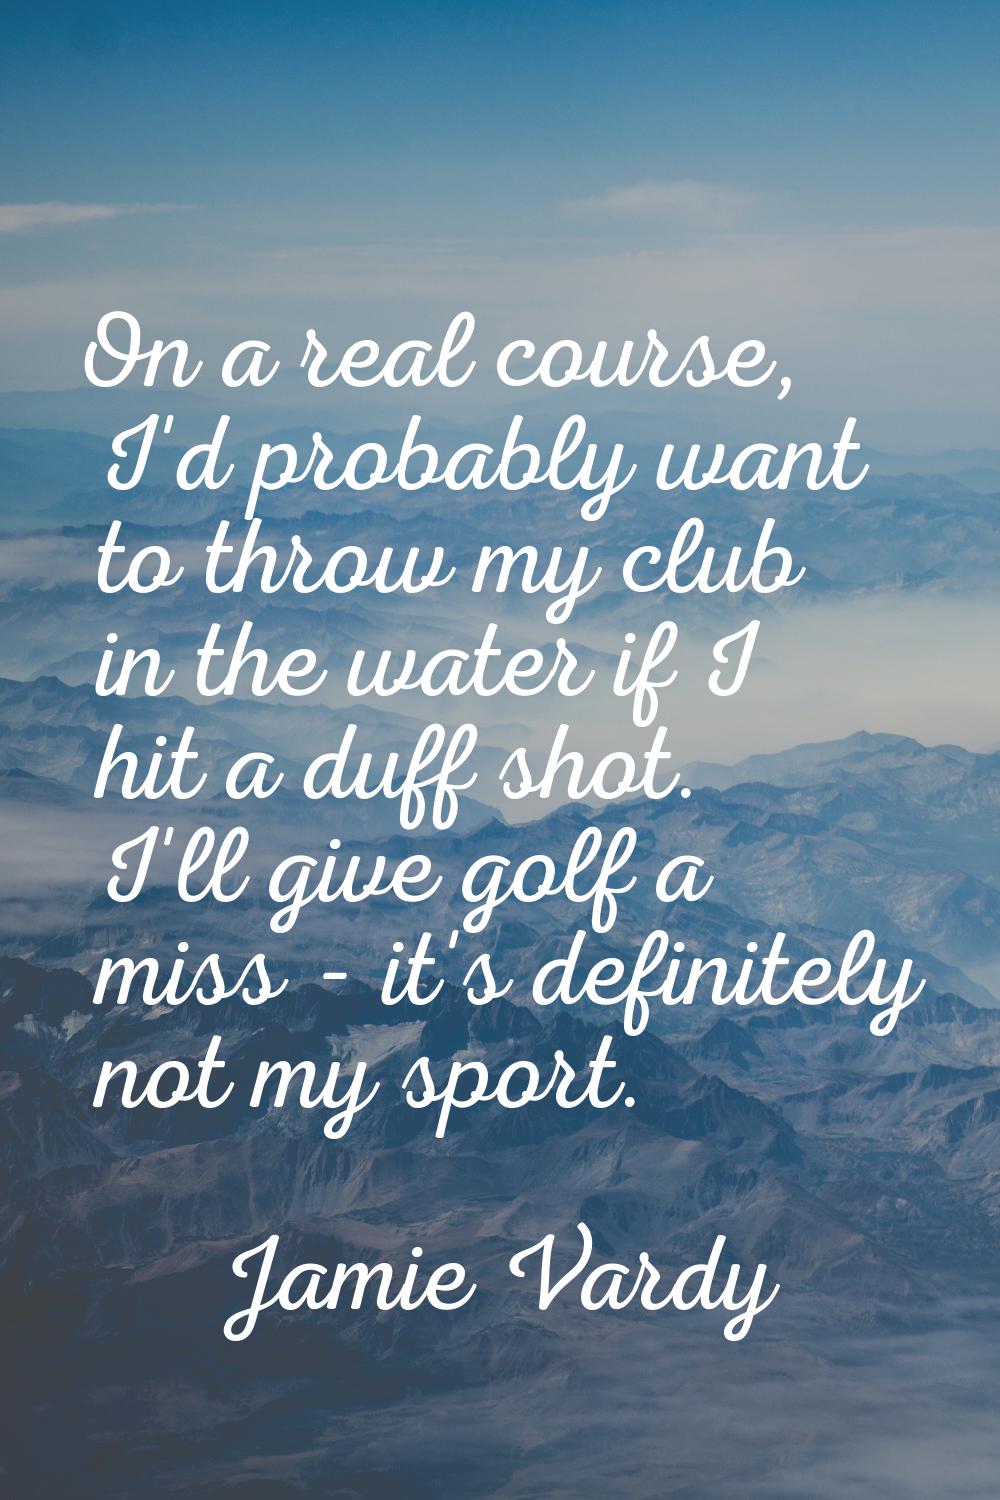 On a real course, I'd probably want to throw my club in the water if I hit a duff shot. I'll give g